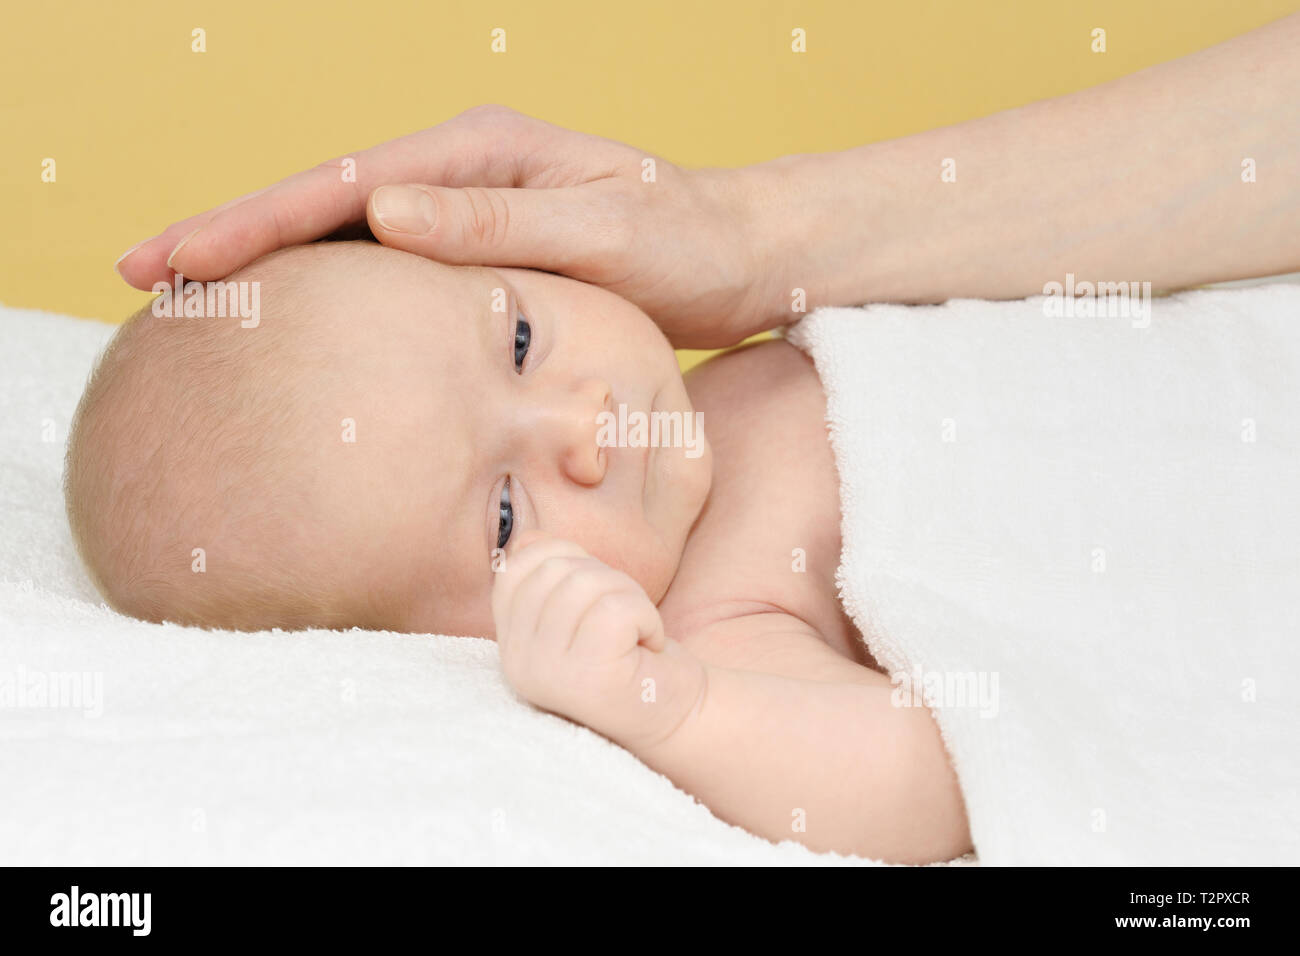 Cute newborn, baby boy lying on a white blanket and his mother's hand Stock Photo